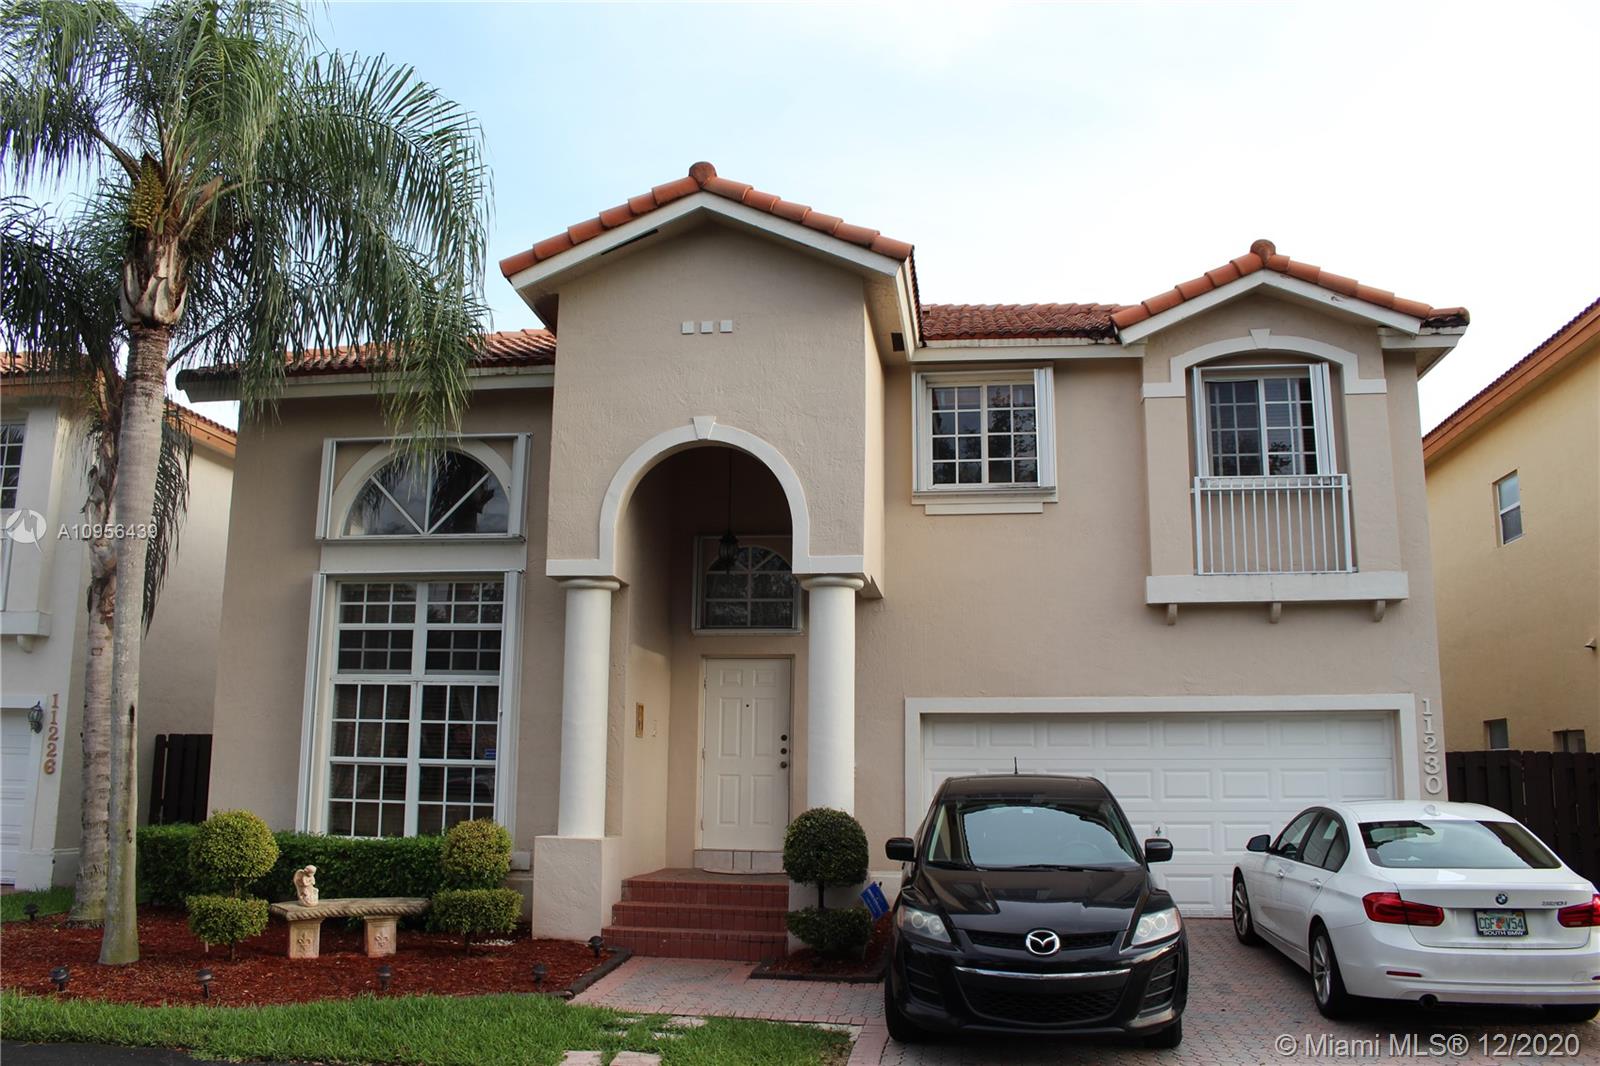 Photo 1 of 11230 59th Ter in Doral - MLS A10956439